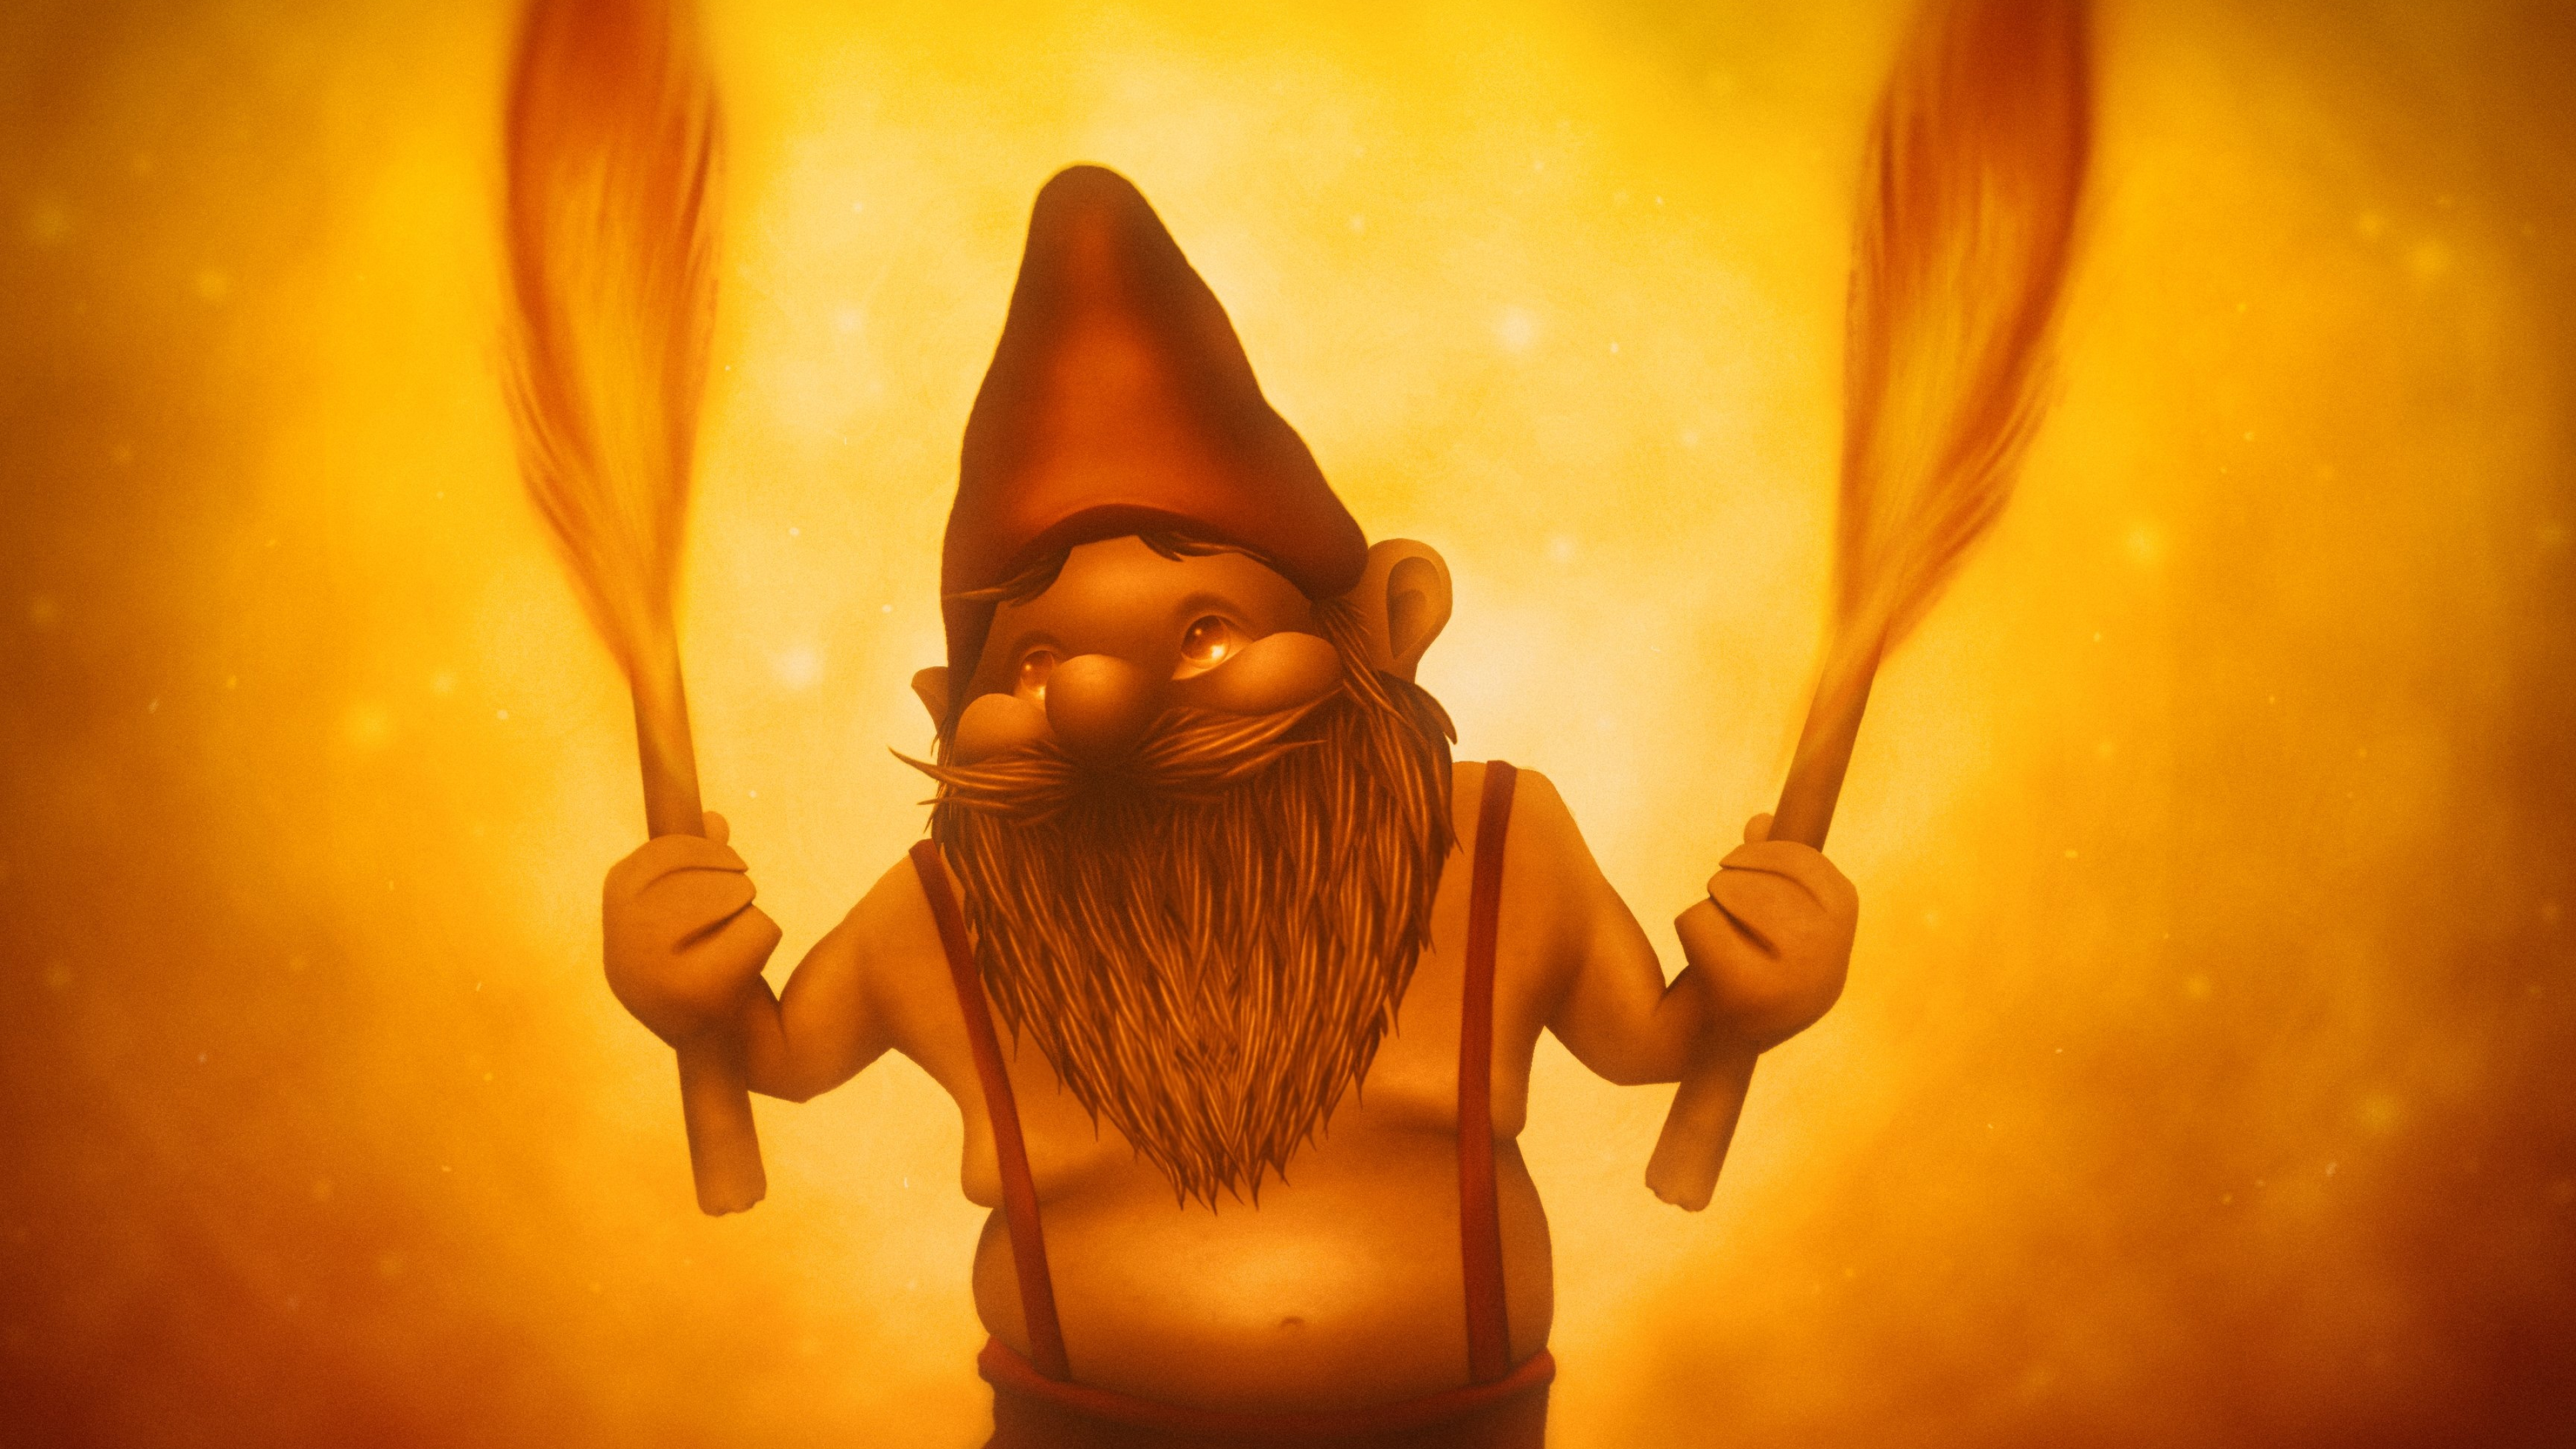 Fire gnome, Hell mac pc wallpapers, Desktop and mobile backgrounds, 3840x2160 4K Desktop